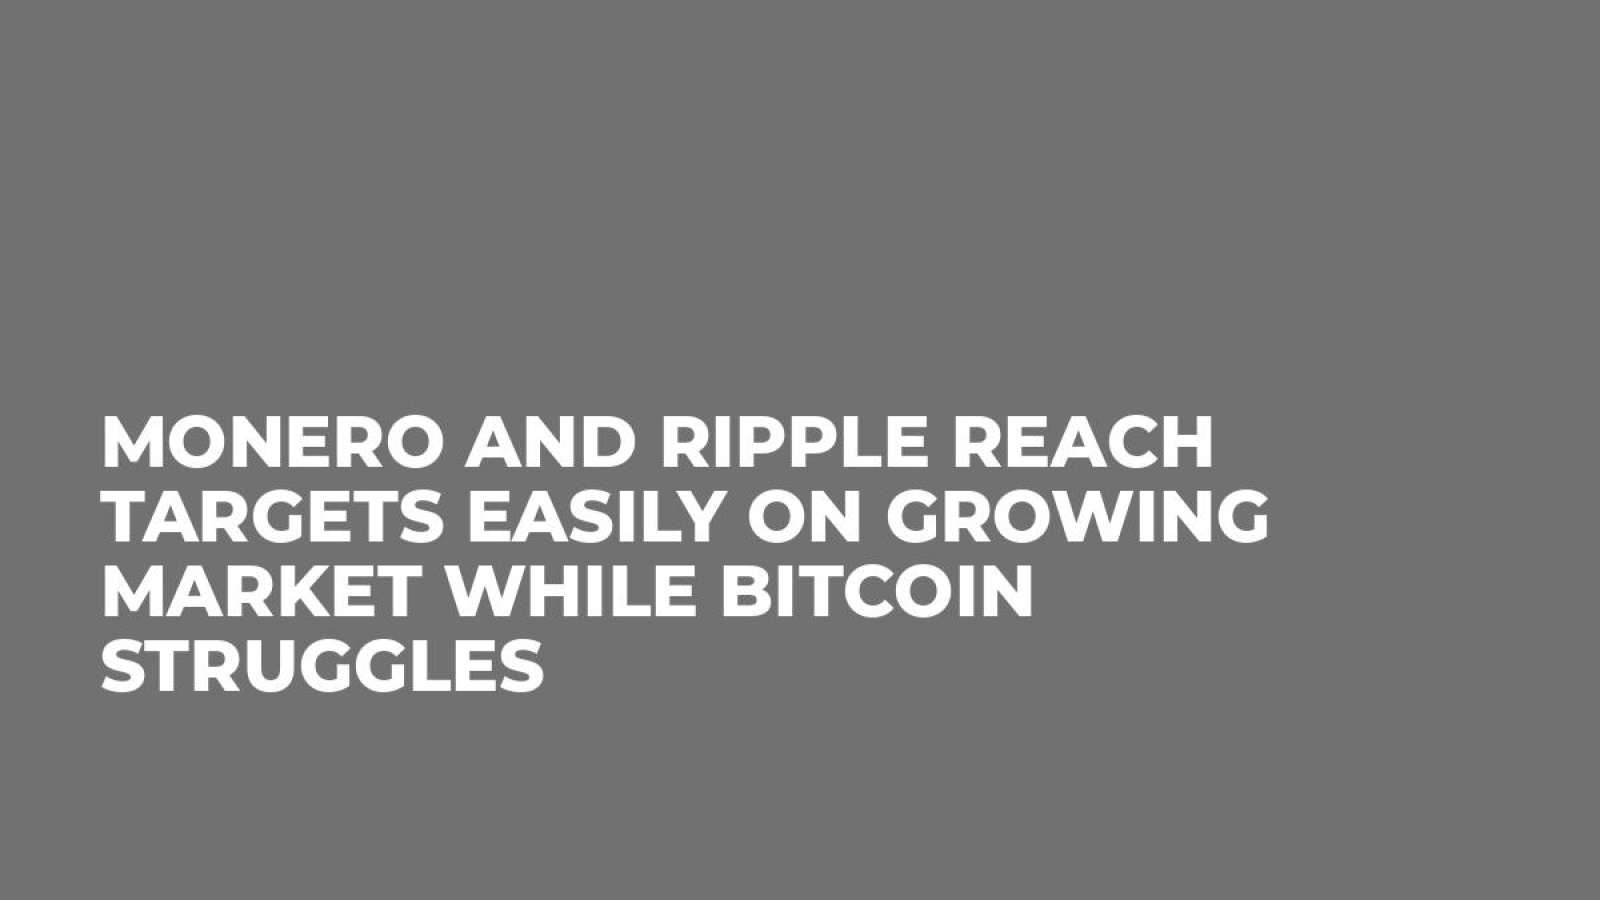 Monero and Ripple Reach Targets Easily on Growing Market While Bitcoin Struggles